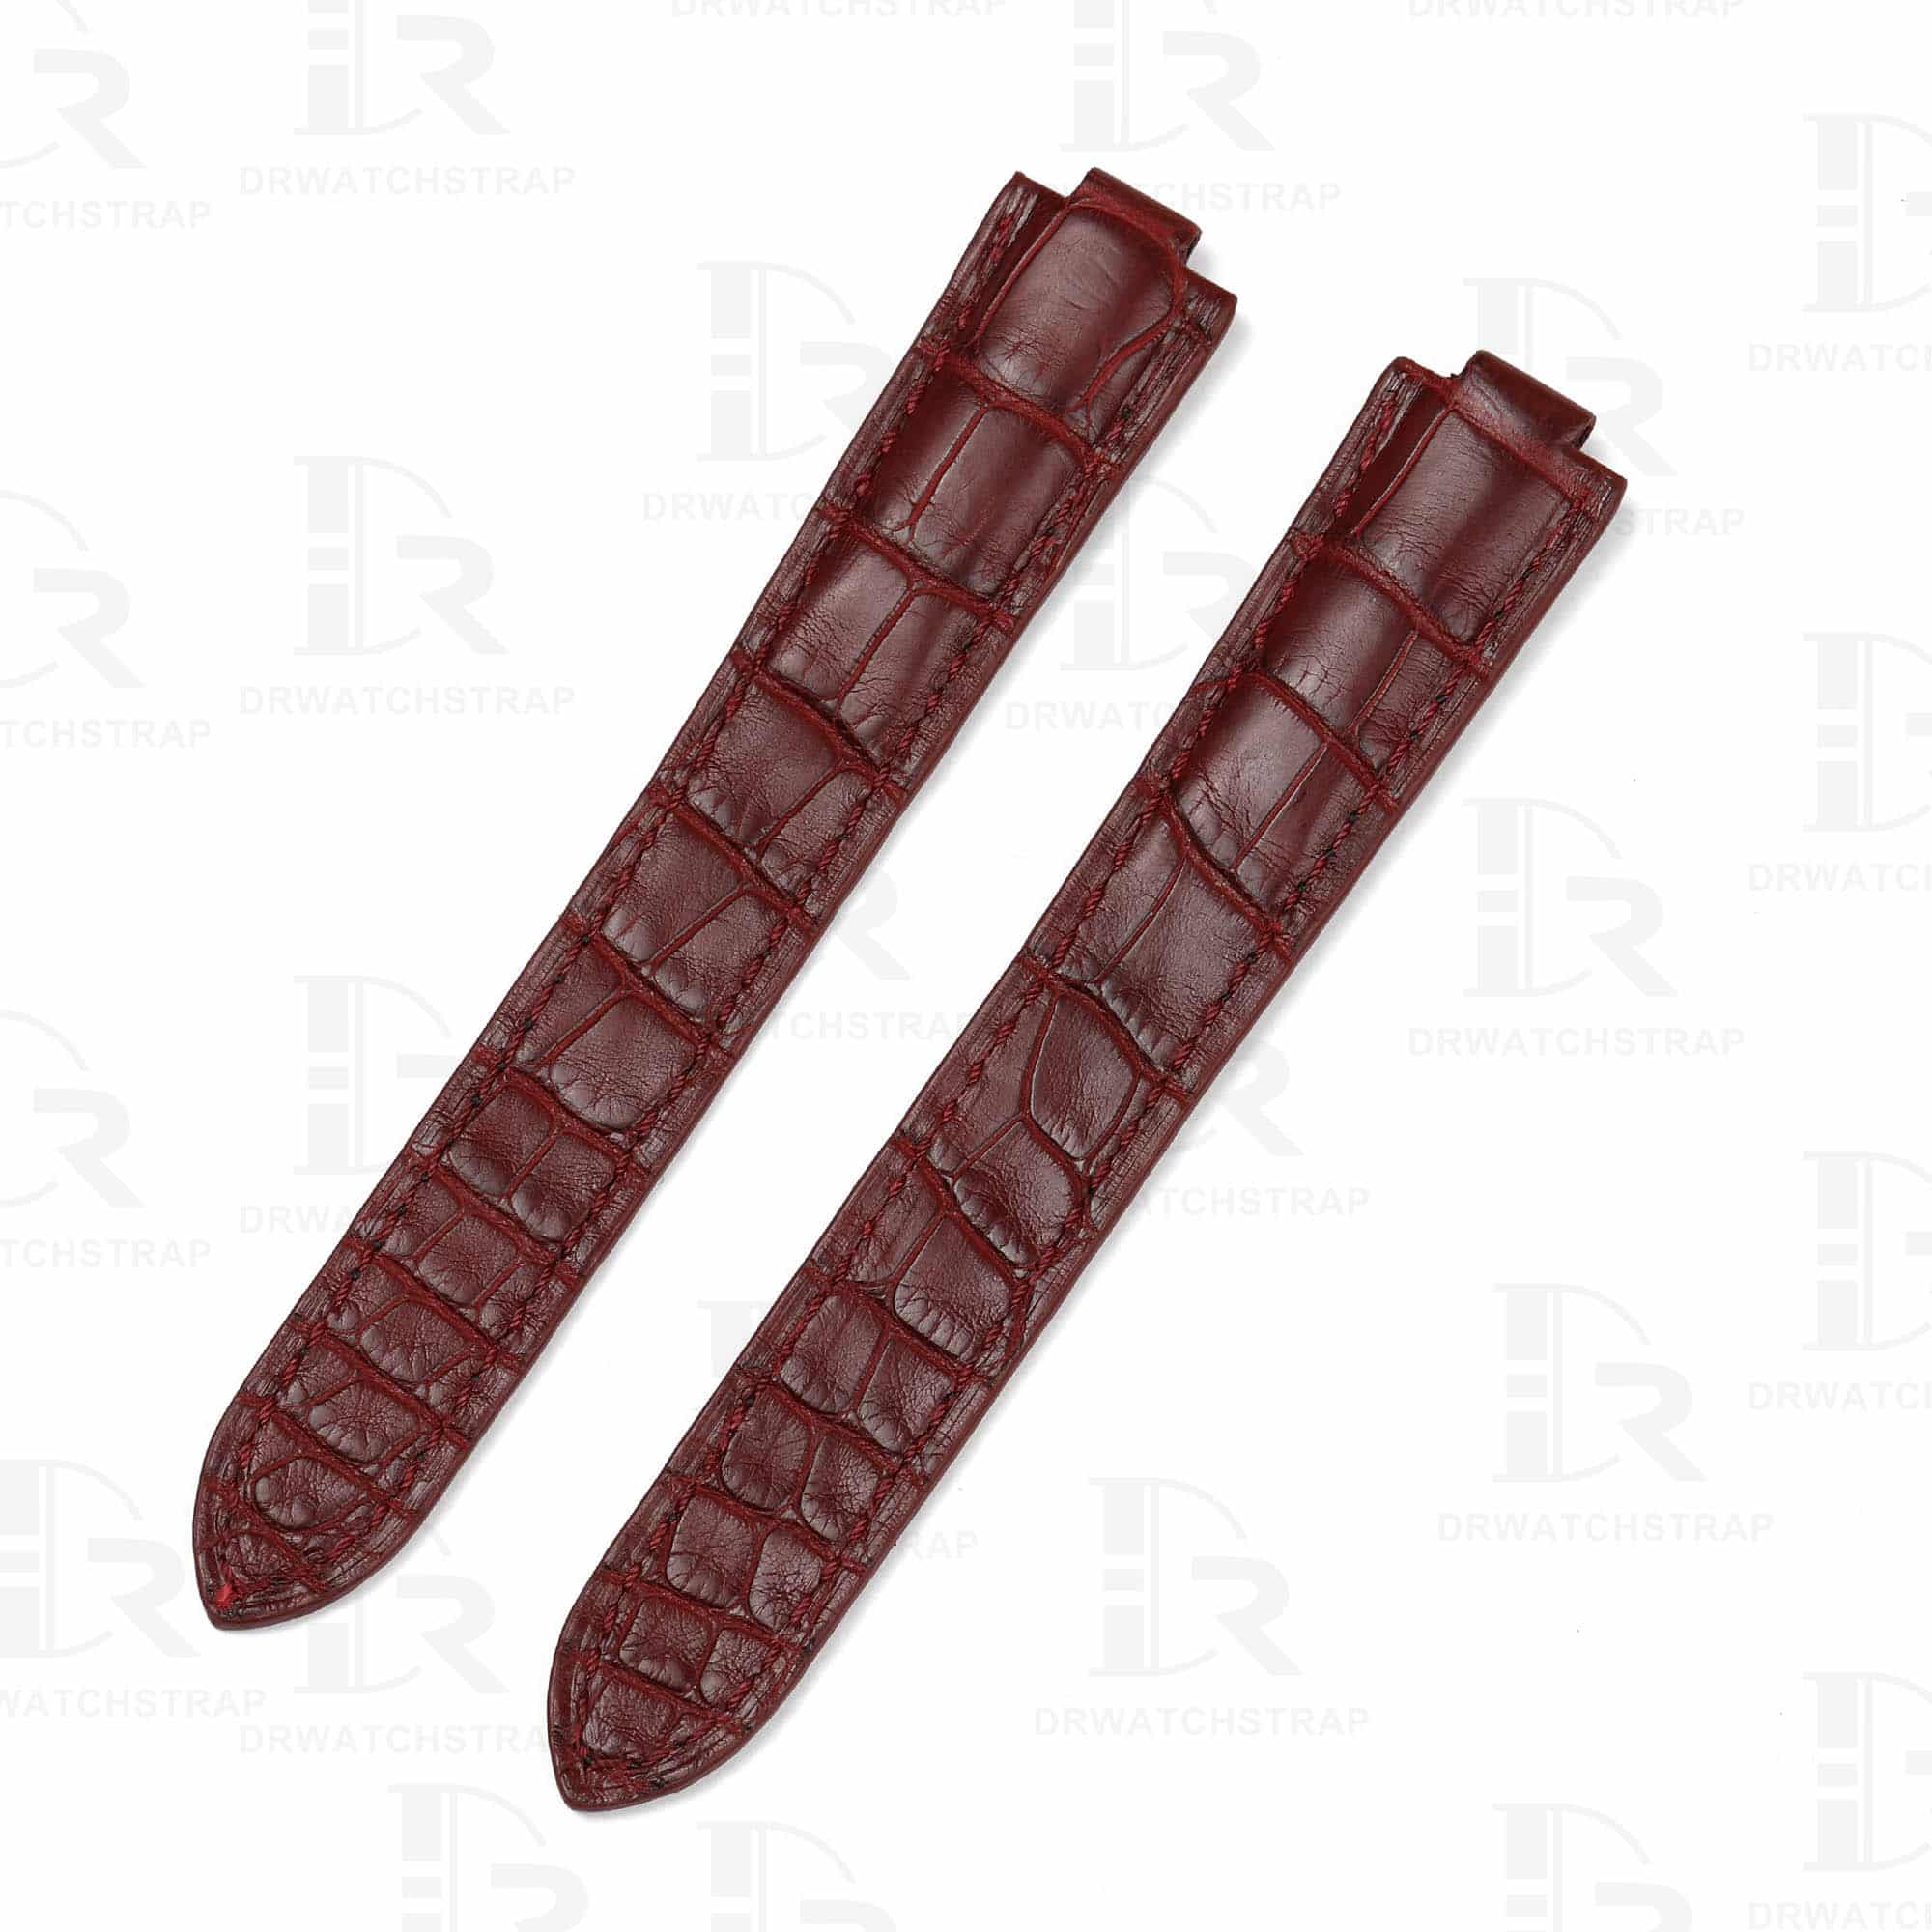 Custom Cartier Ballon Bleu Deep Red leather watch straps 14mm 16mm 18mm 20mm 22mm replacement for sale